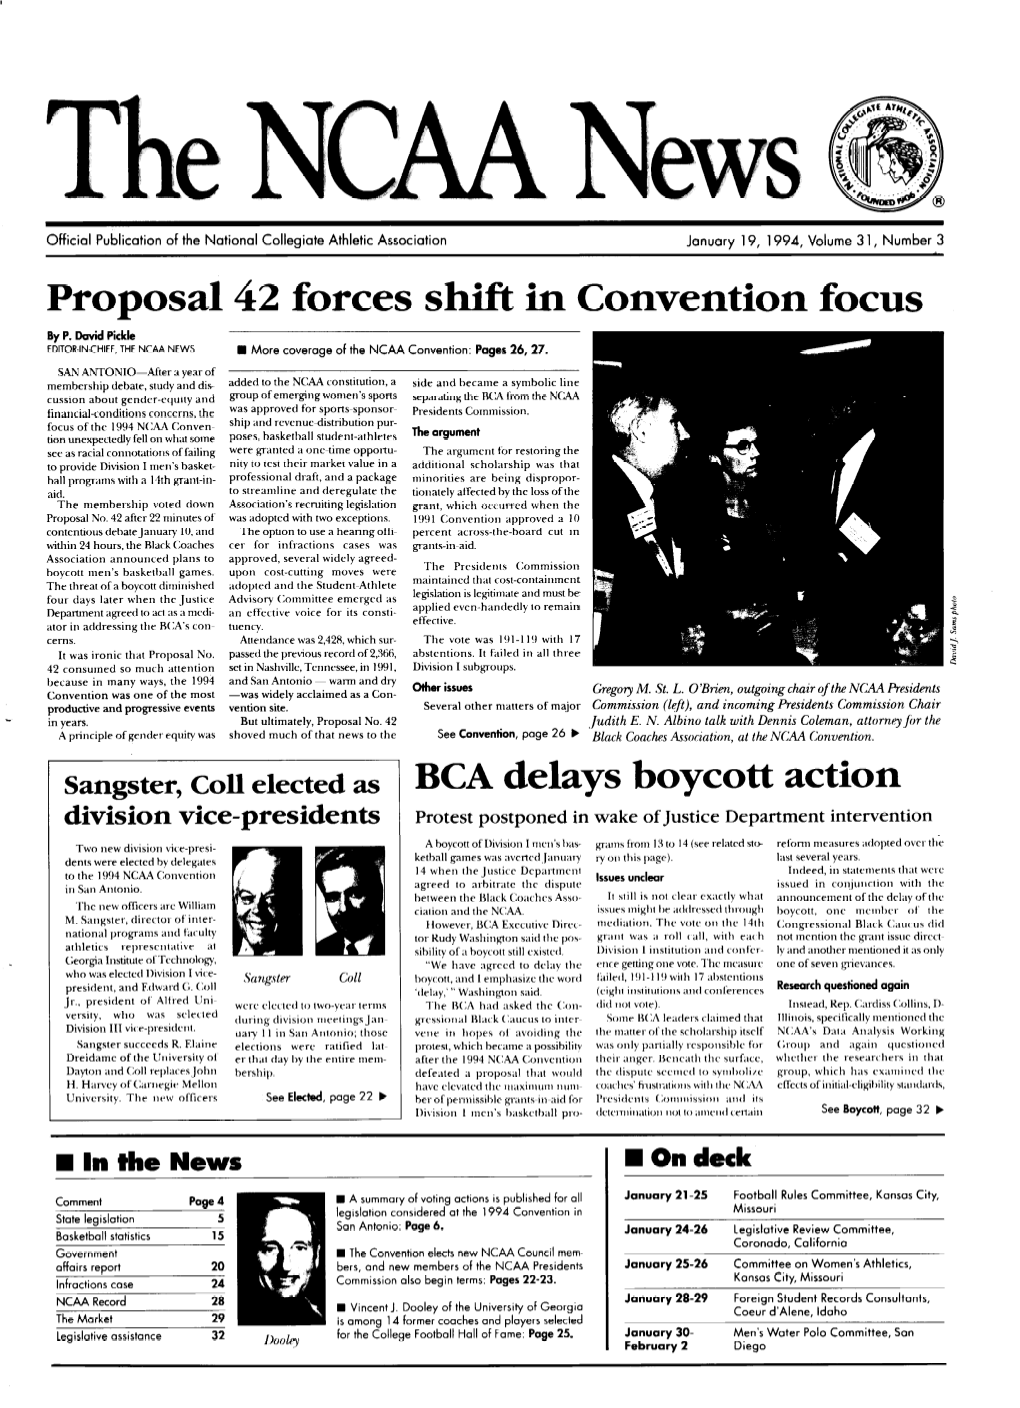 THE NCAA NEWS L More Coverage of the NCAA Convention: Pages 26,27